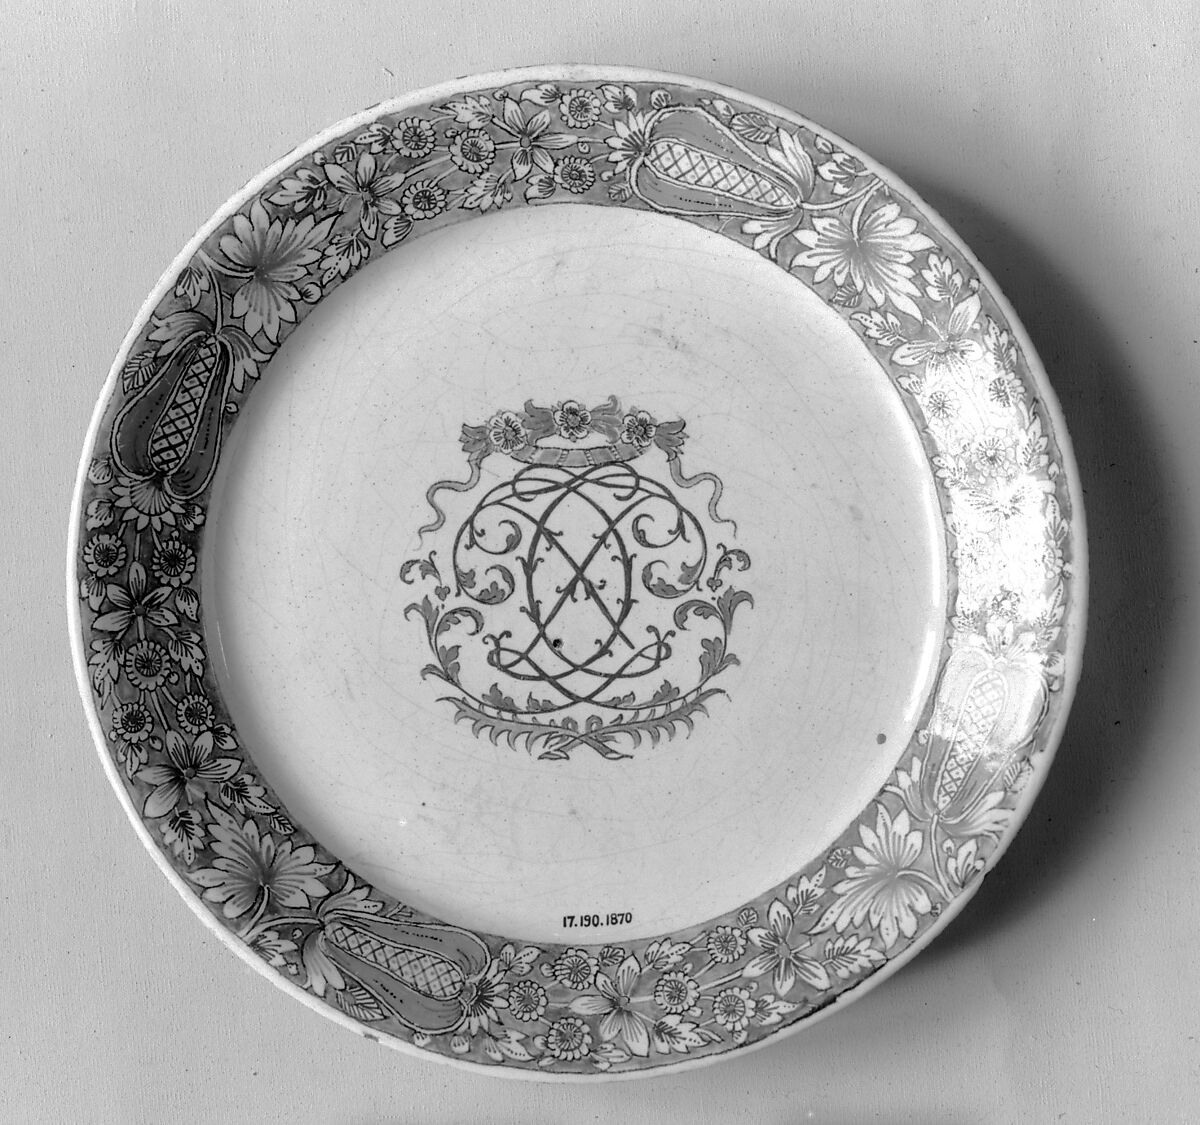 Plate, Factory of Jean-Baptiste Guillibaud (working 1720–39), Faience (tin-glazed earthenware), French, Rouen 